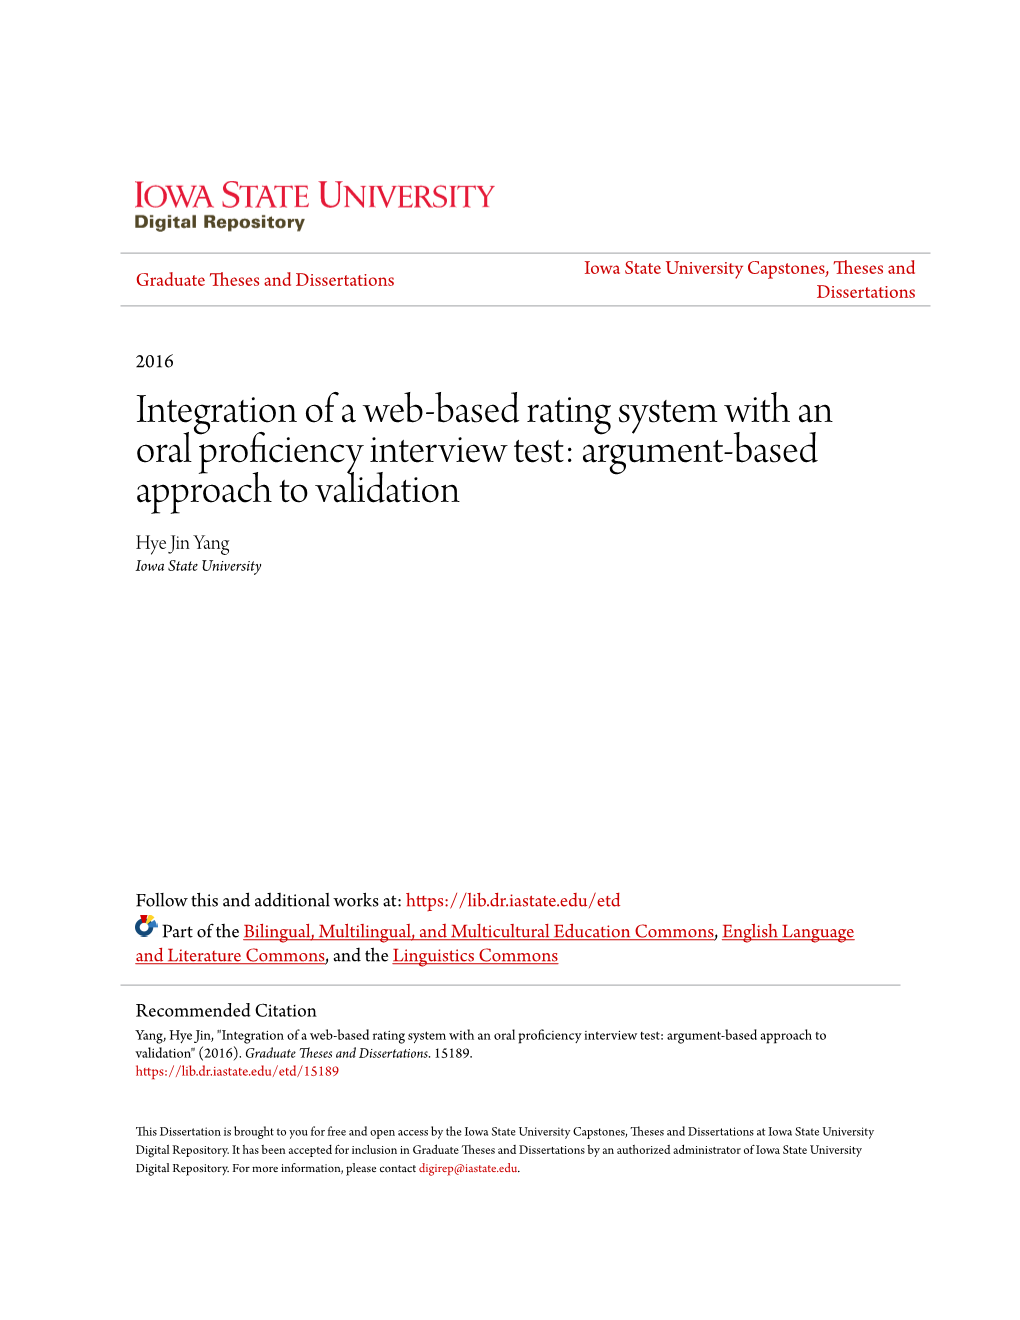 Integration of a Web-Based Rating System with an Oral Proficiency Interview Test: Argument-Based Approach to Validation Hye Jin Yang Iowa State University